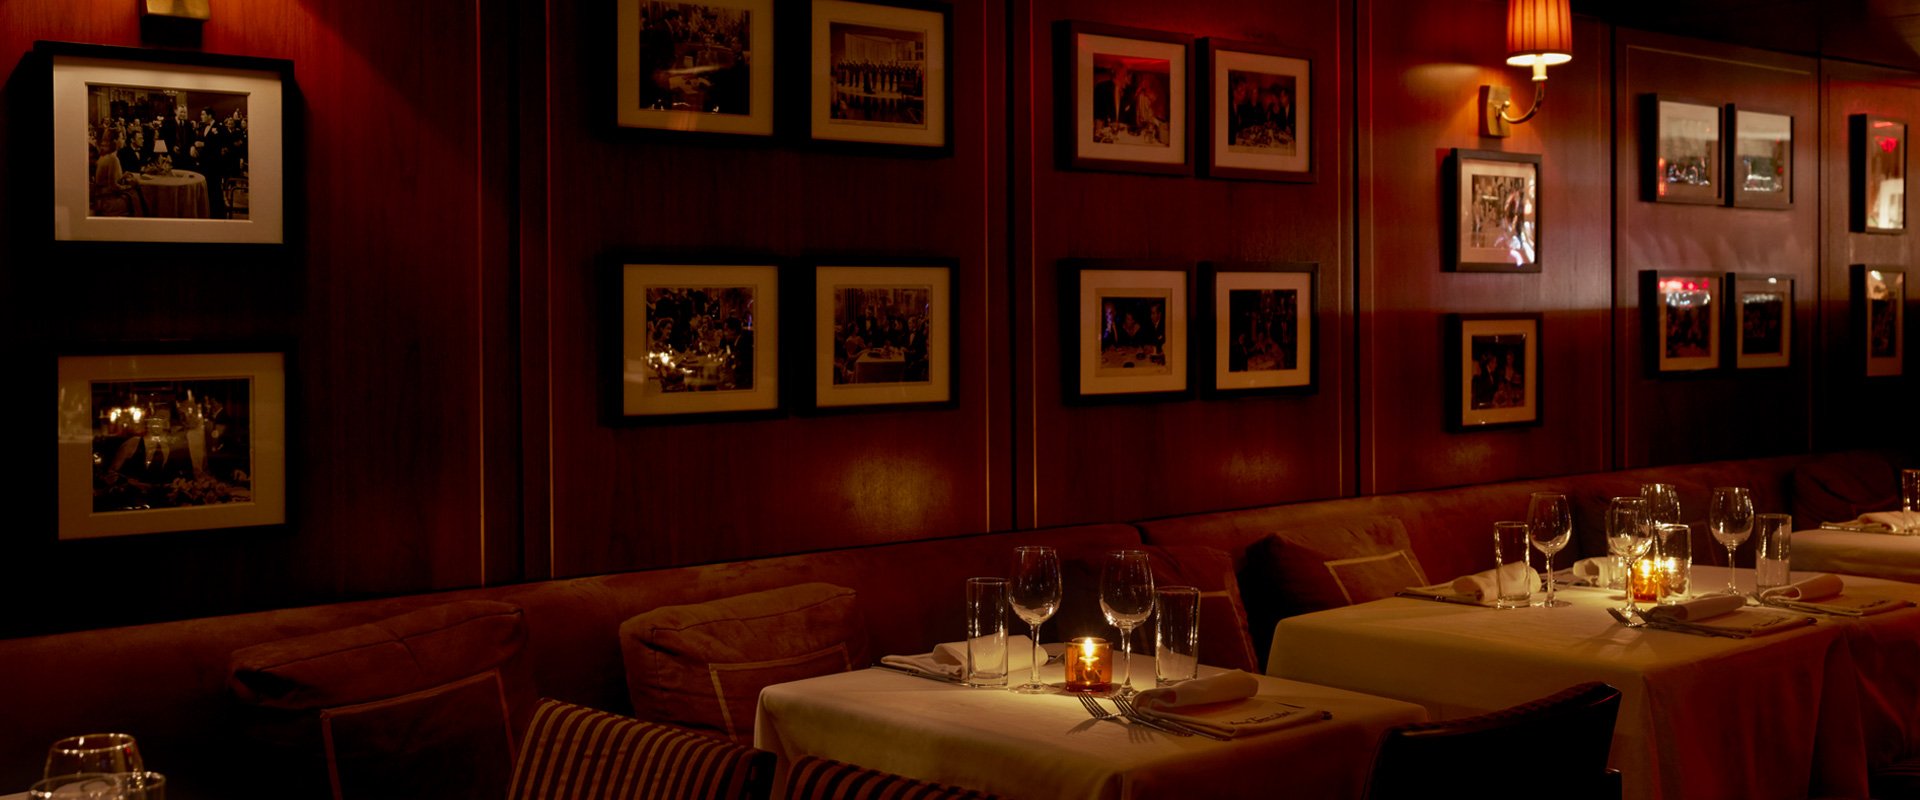 A cozy rendezvous inspired by early Hollywood, The Tower Bar and Restaurant offers an elegant haven for the discerning.